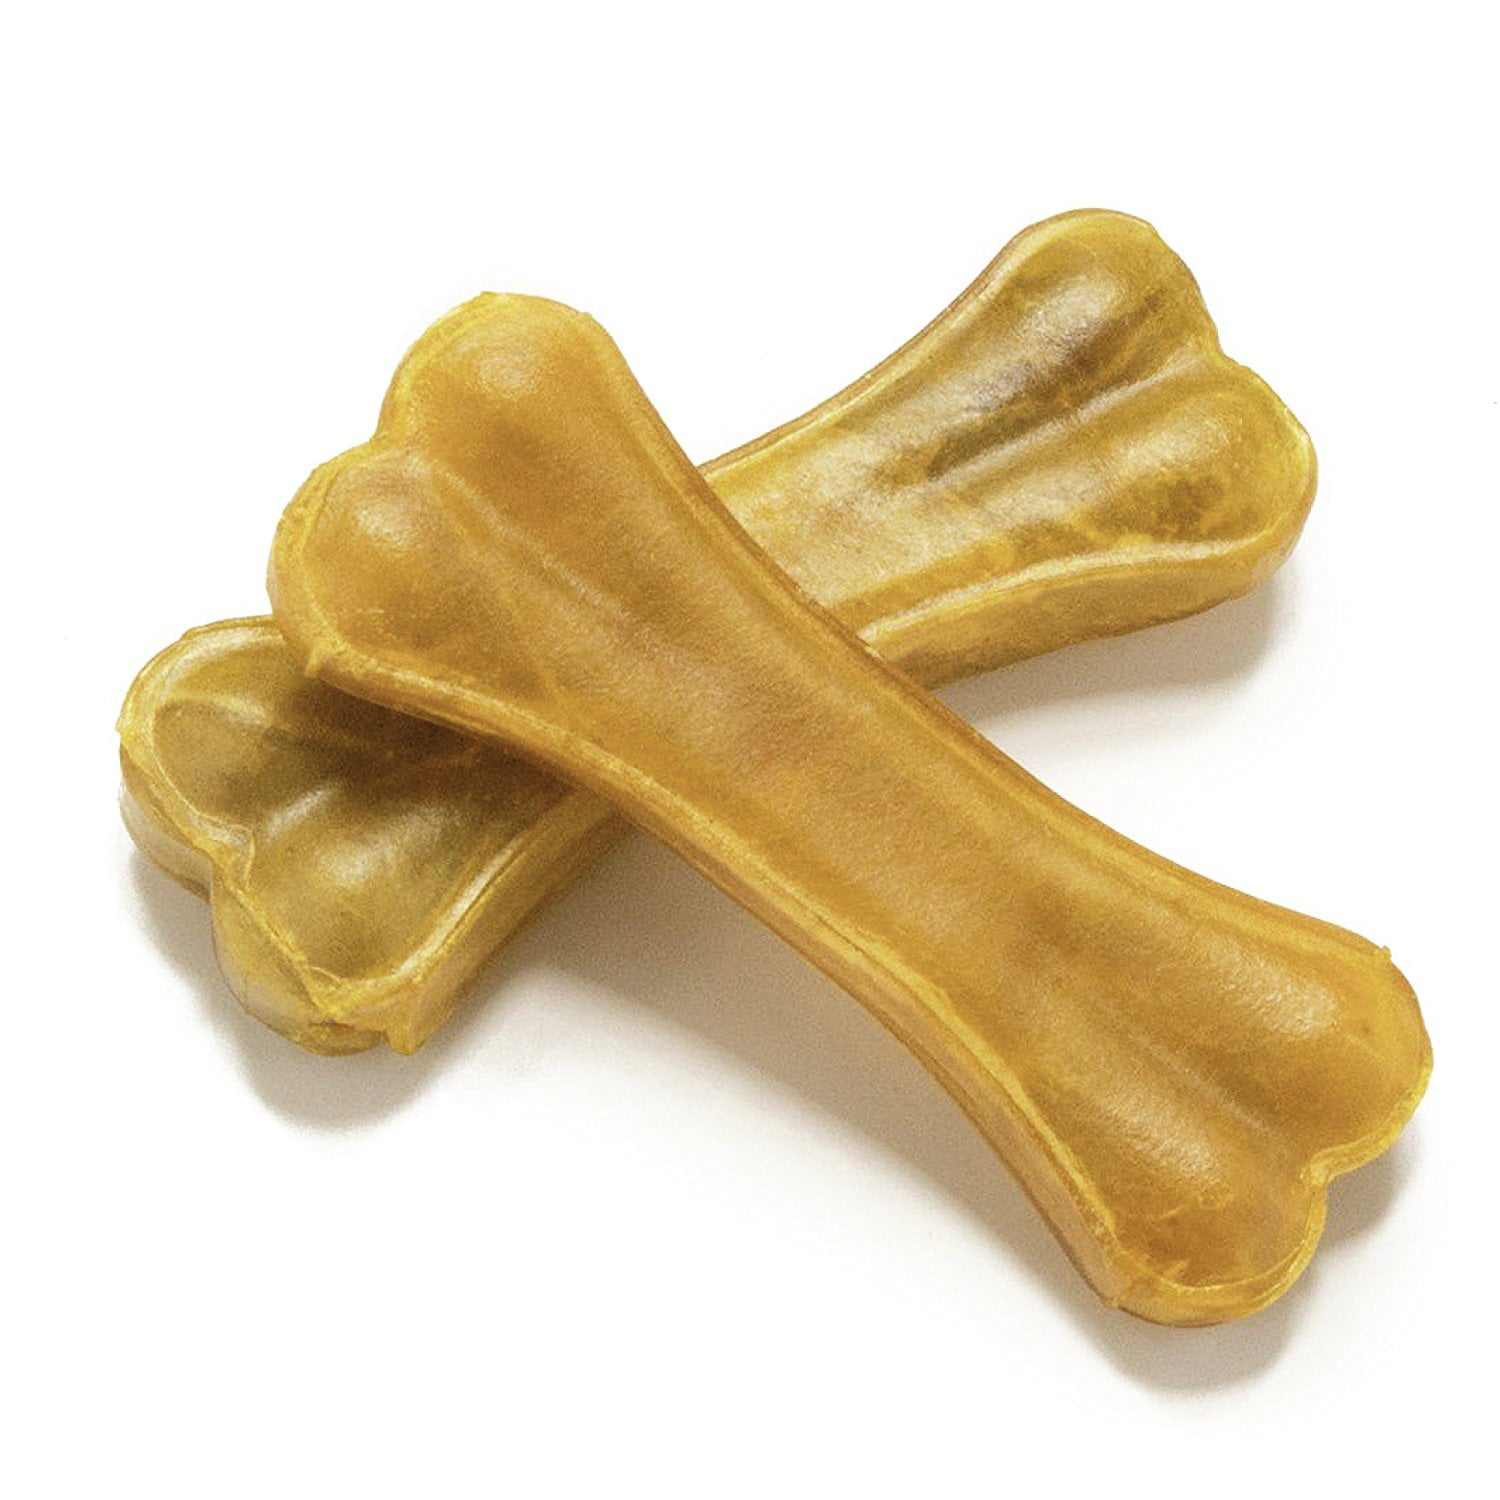 Pressed Rawhide for Large Dogs Packed in The USA Natural Rawhide Dog Chews 100-count Bulk Bulk Rawhide Chews Raw Paws Pet Premium 10-inch Compressed Rawhide Sticks for Dogs 